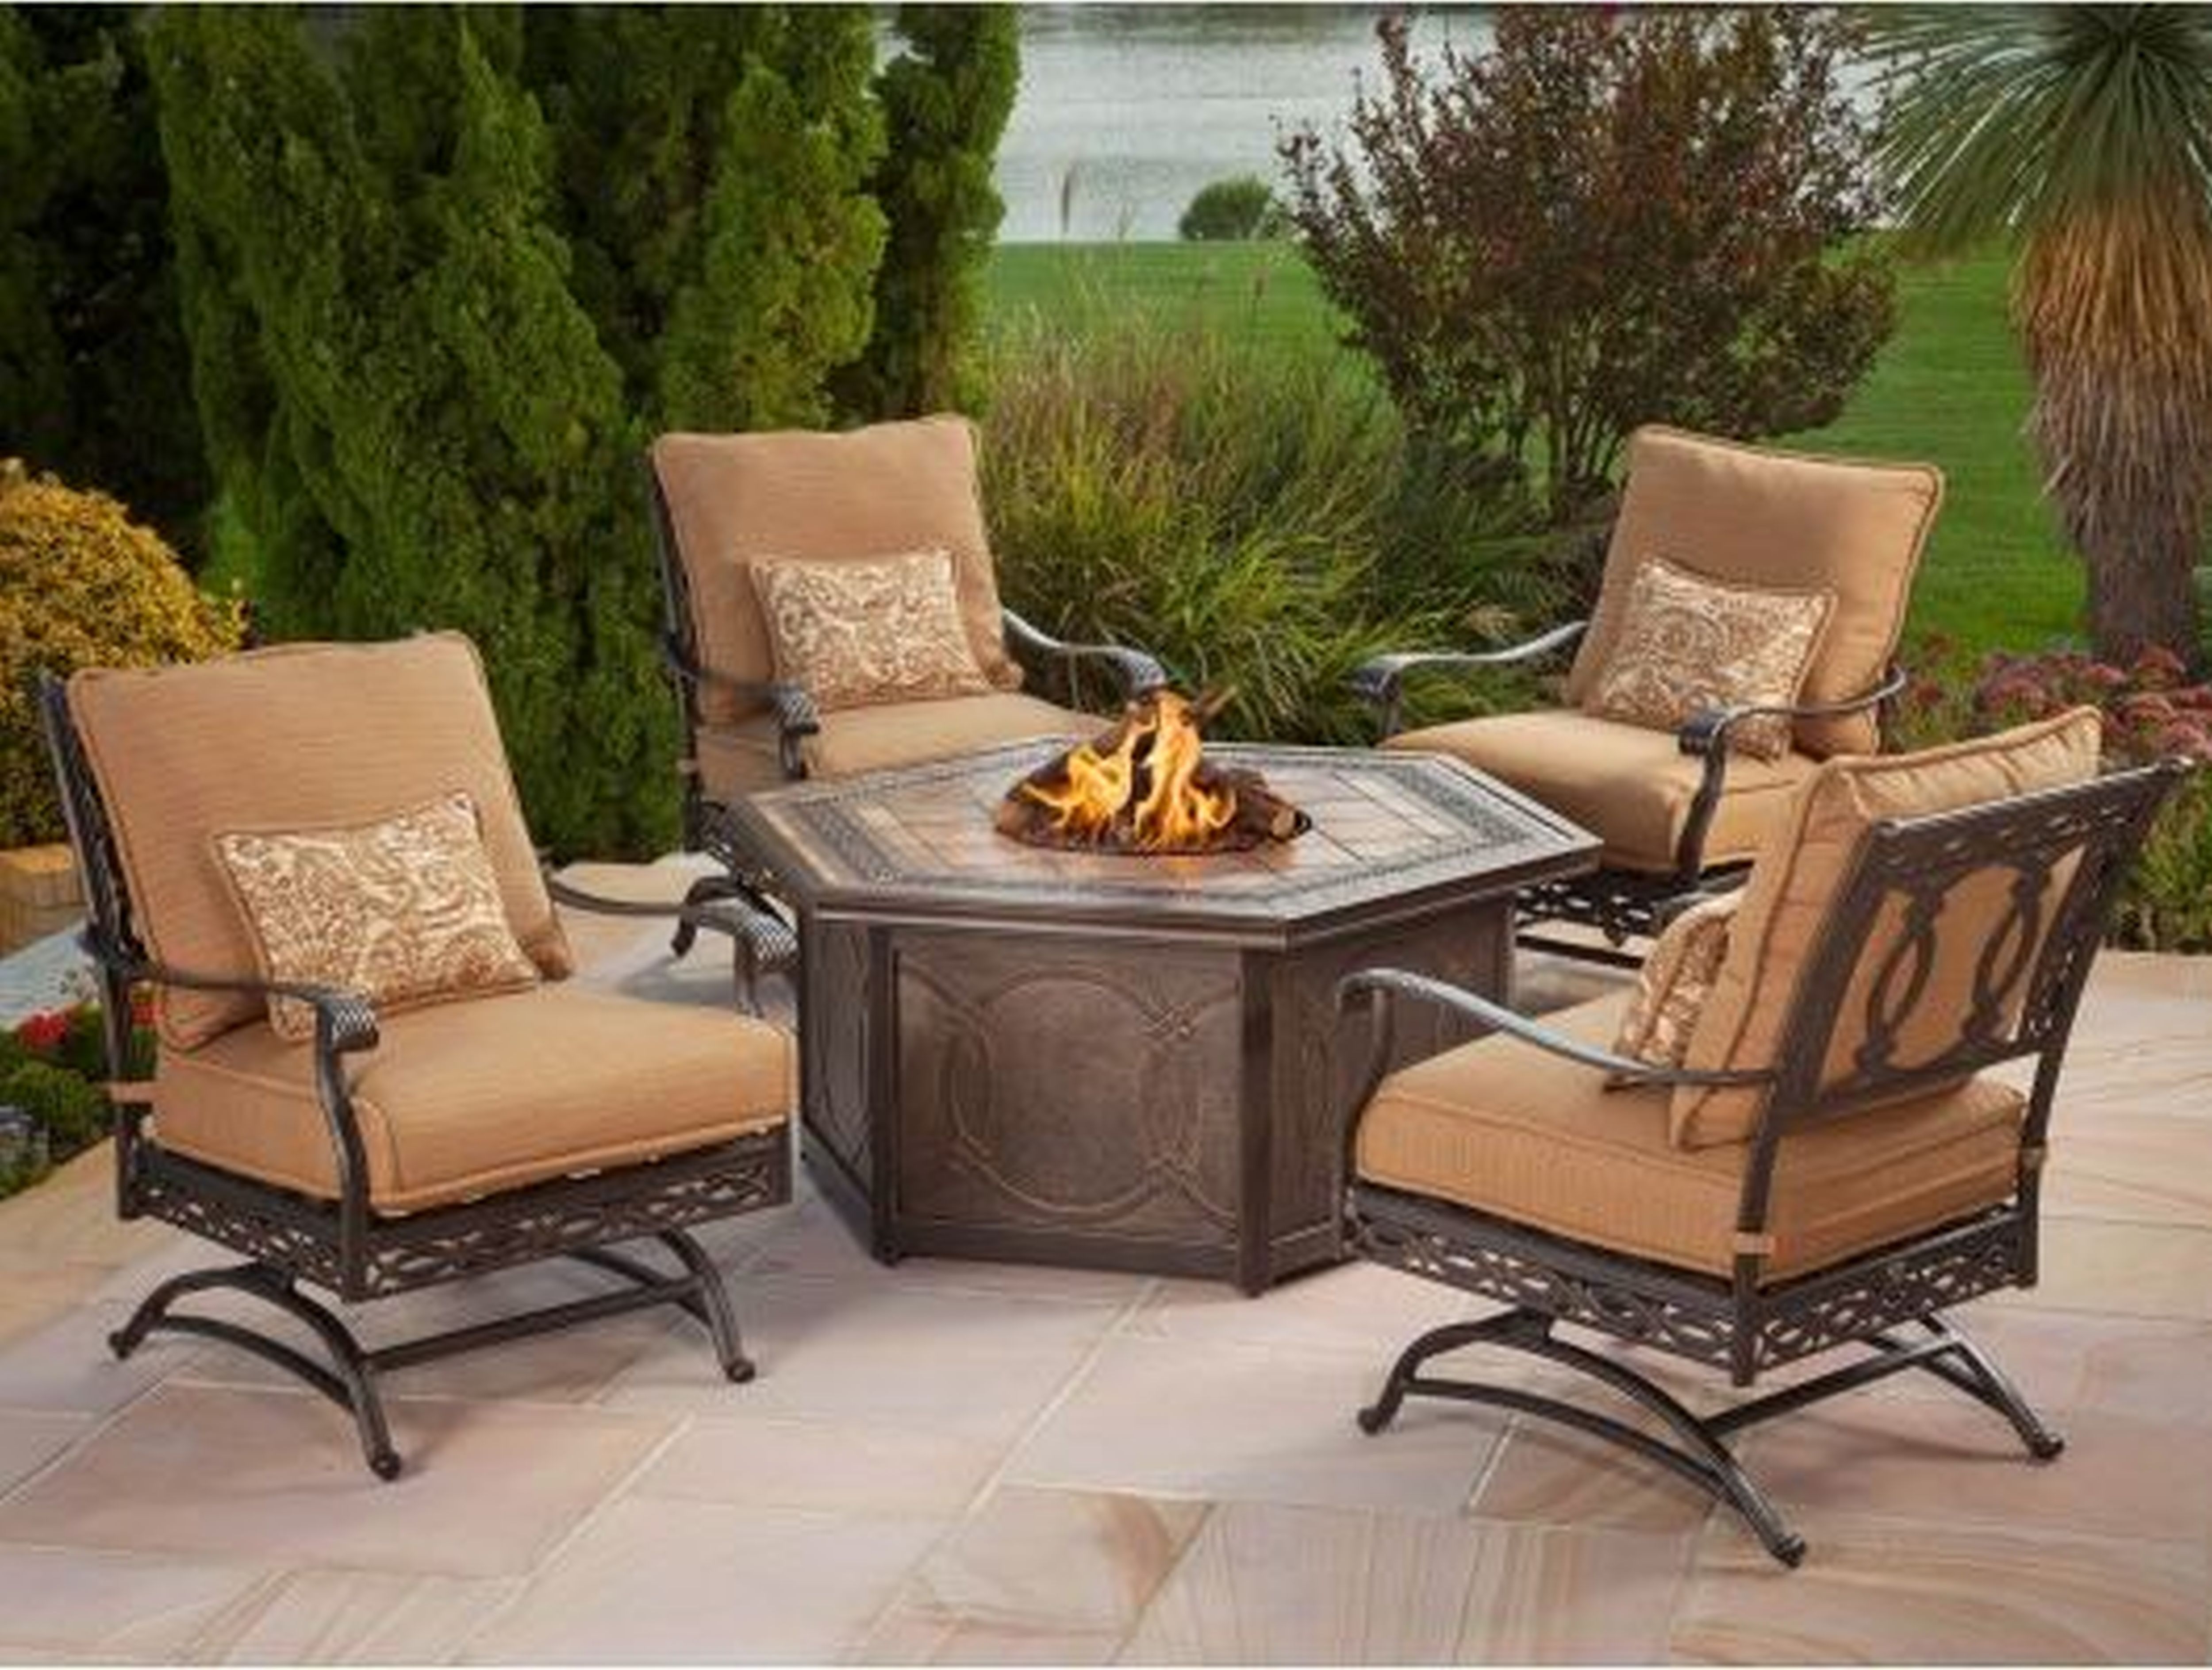 Patio Set Clearance Home Depot Patio Furniture Clearance Patio Fire Pit  As Furniture Covers